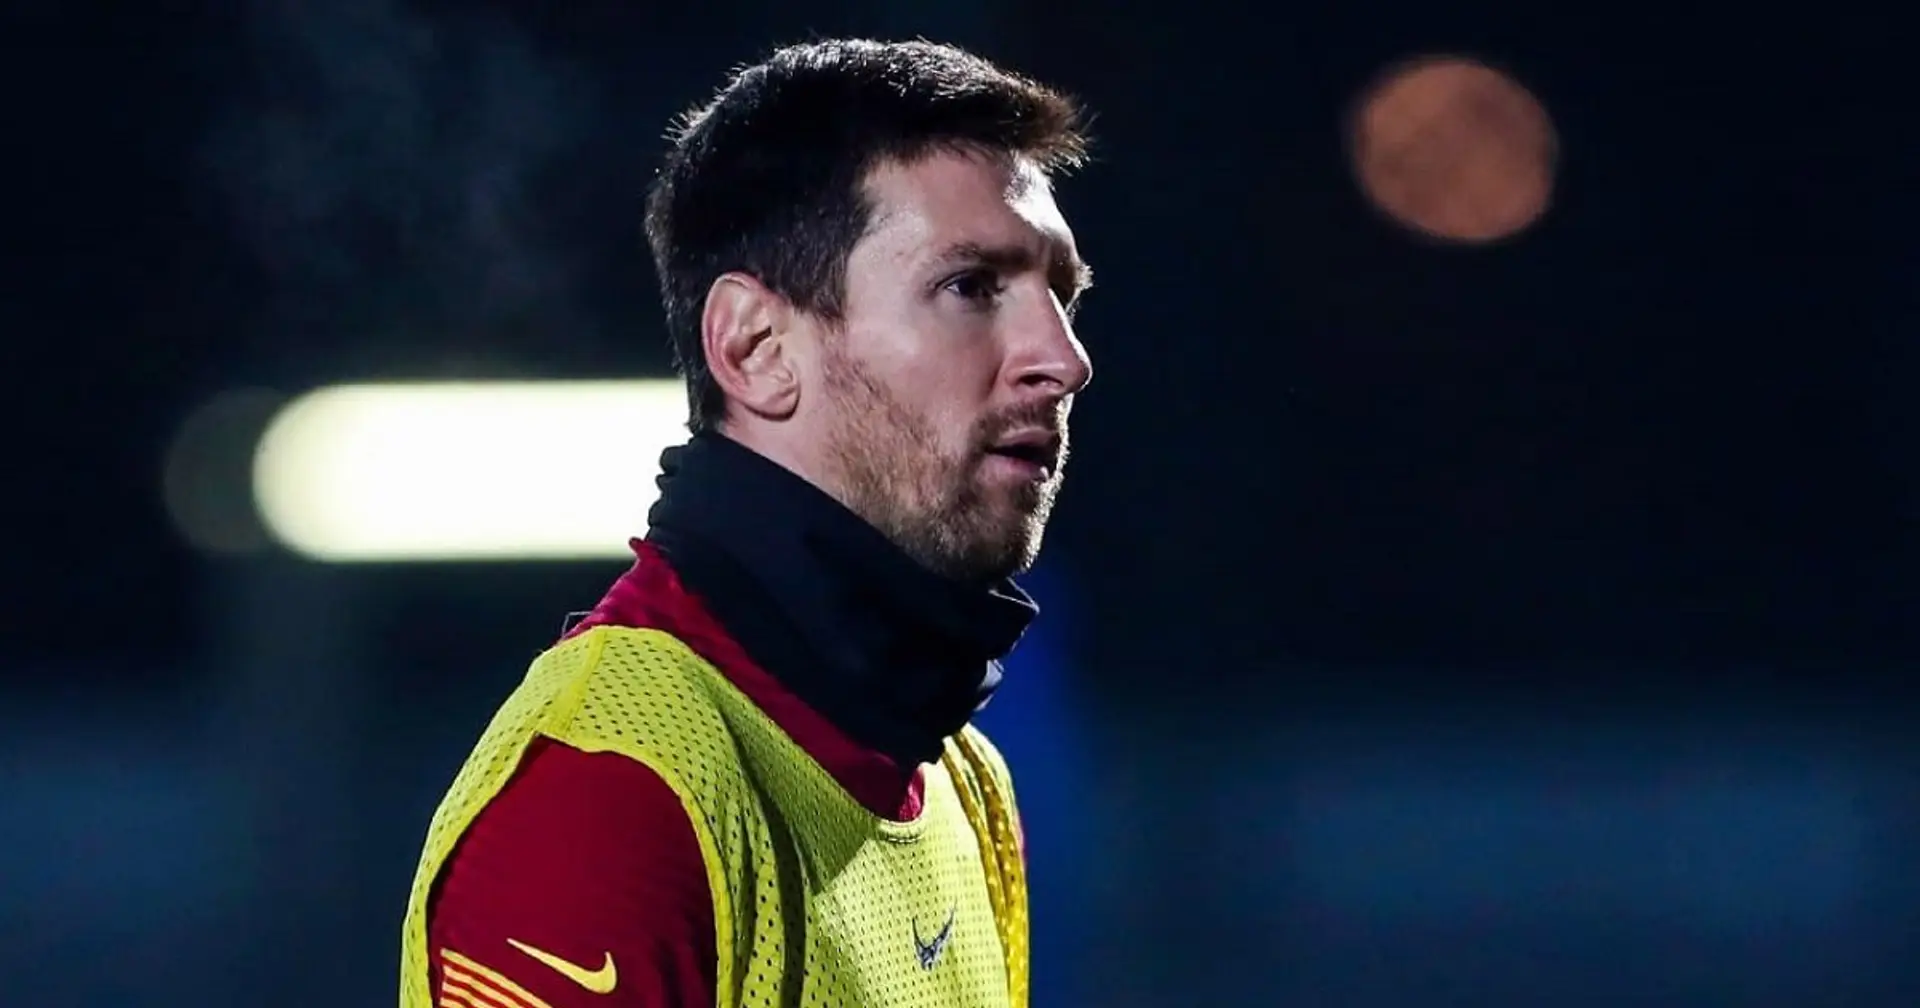 Still got it: Leo Messi named players with most completed dribbles in Europe